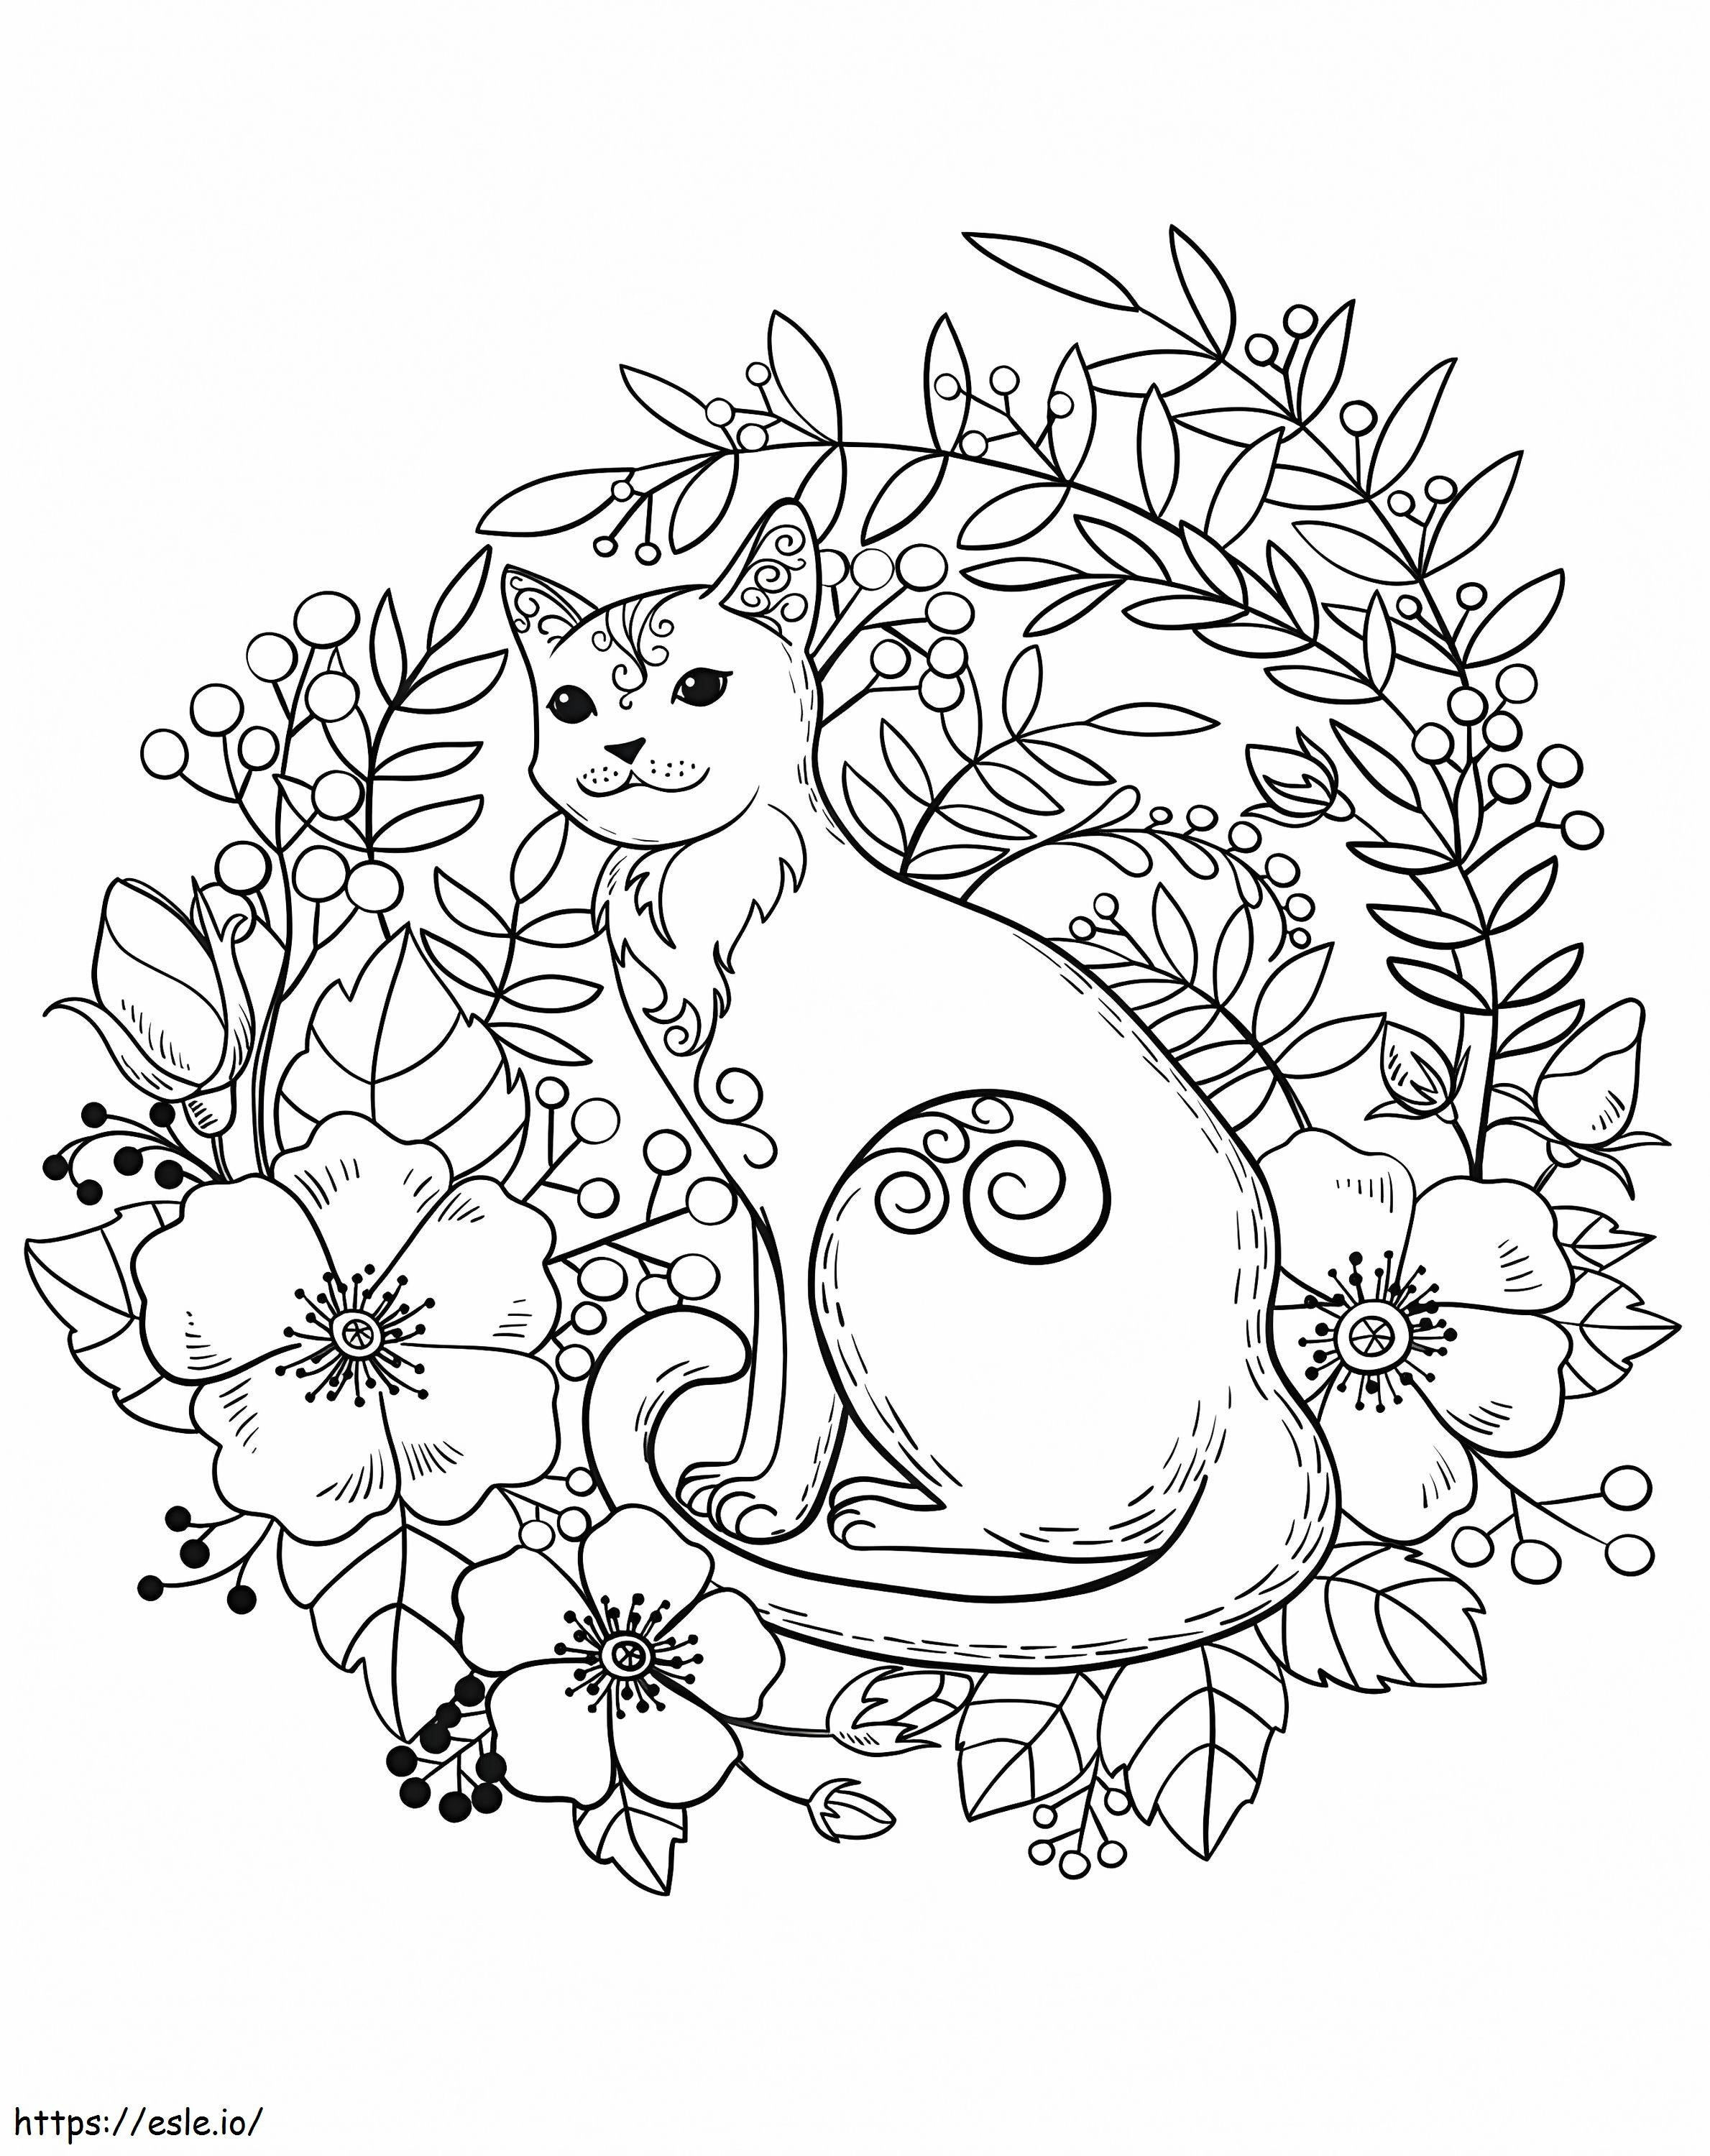 1560155505 Cat In Flowers A4 coloring page